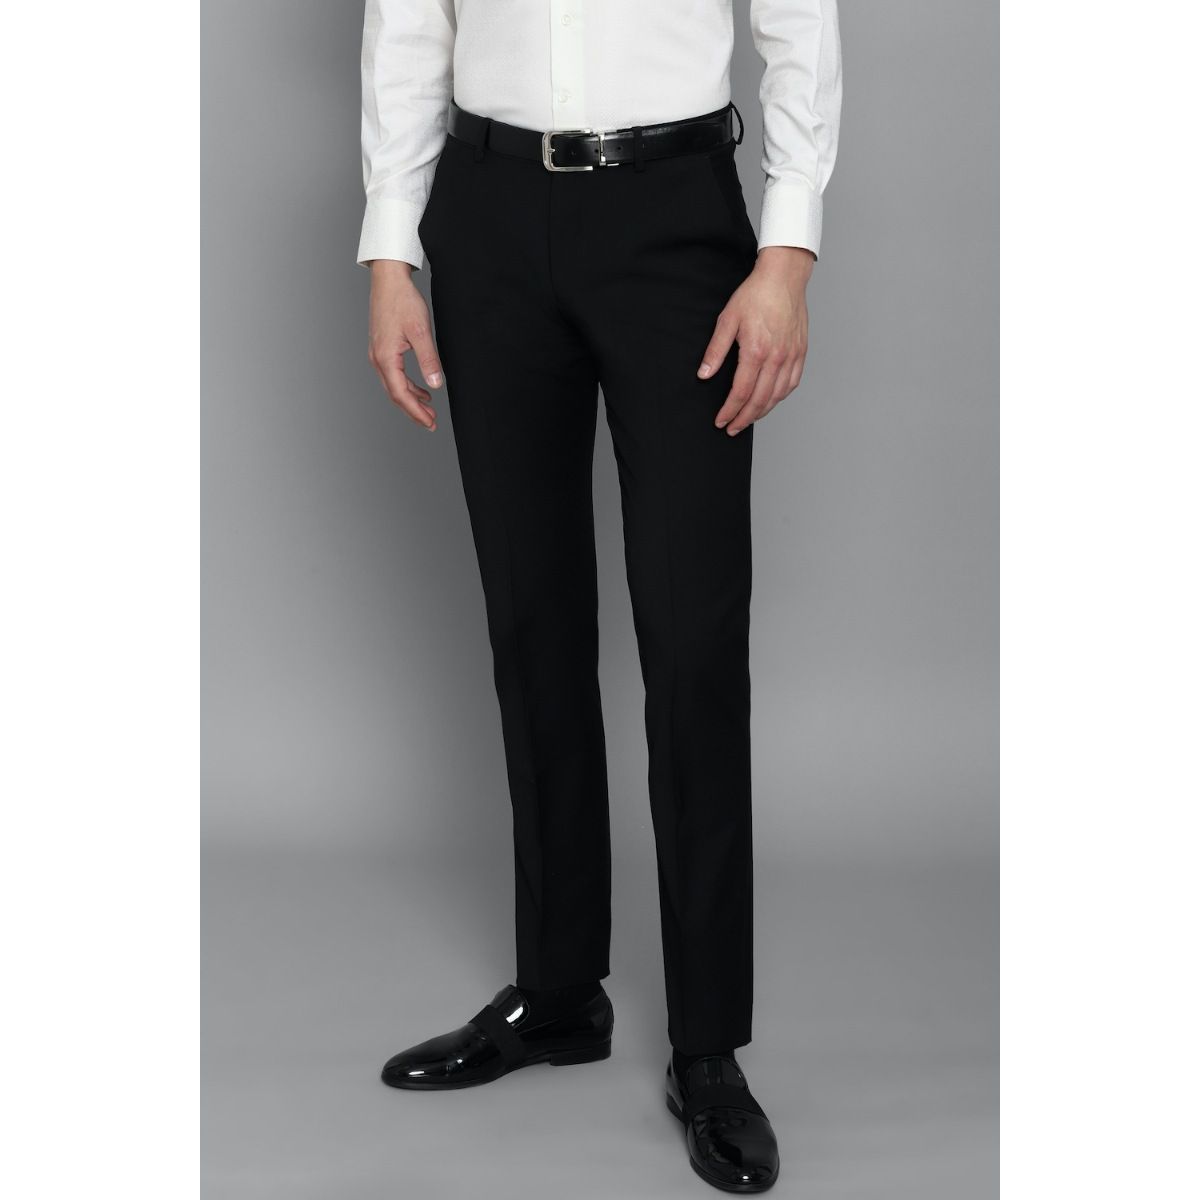 Buy Louis Philippe Black Trousers Online  742740  Louis Philippe